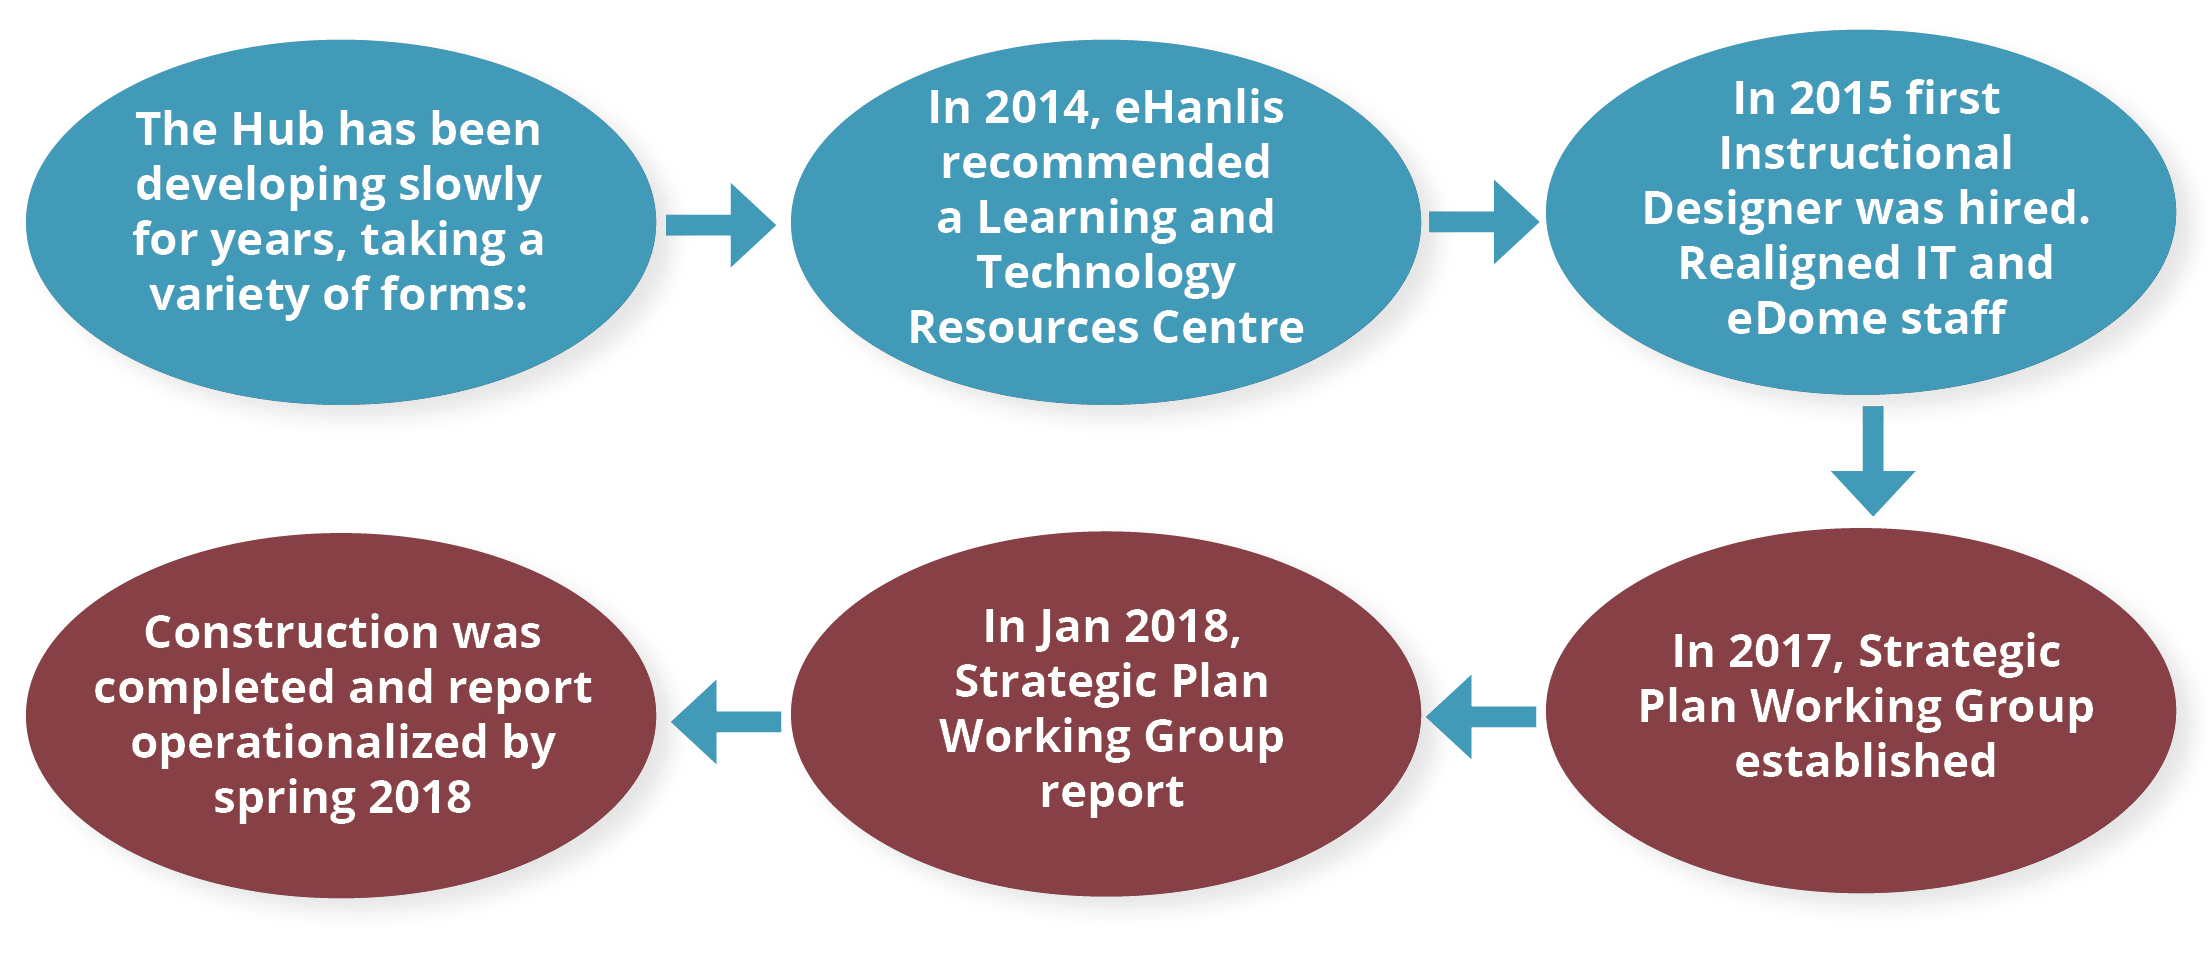 Timeline showing that in 2014 eHanlis recommended a learning and technology resources centre, followed by the 2015 hiring of the first Instructional Designer, the subsequent realignment of IT and eDome staff, leading to the 2017 establishment of the Strategic Plan Working Group, followed by the 2018 Strategic Plan Working Group report, and concluding with the completed construction and operation of the report in the spring of 2018.